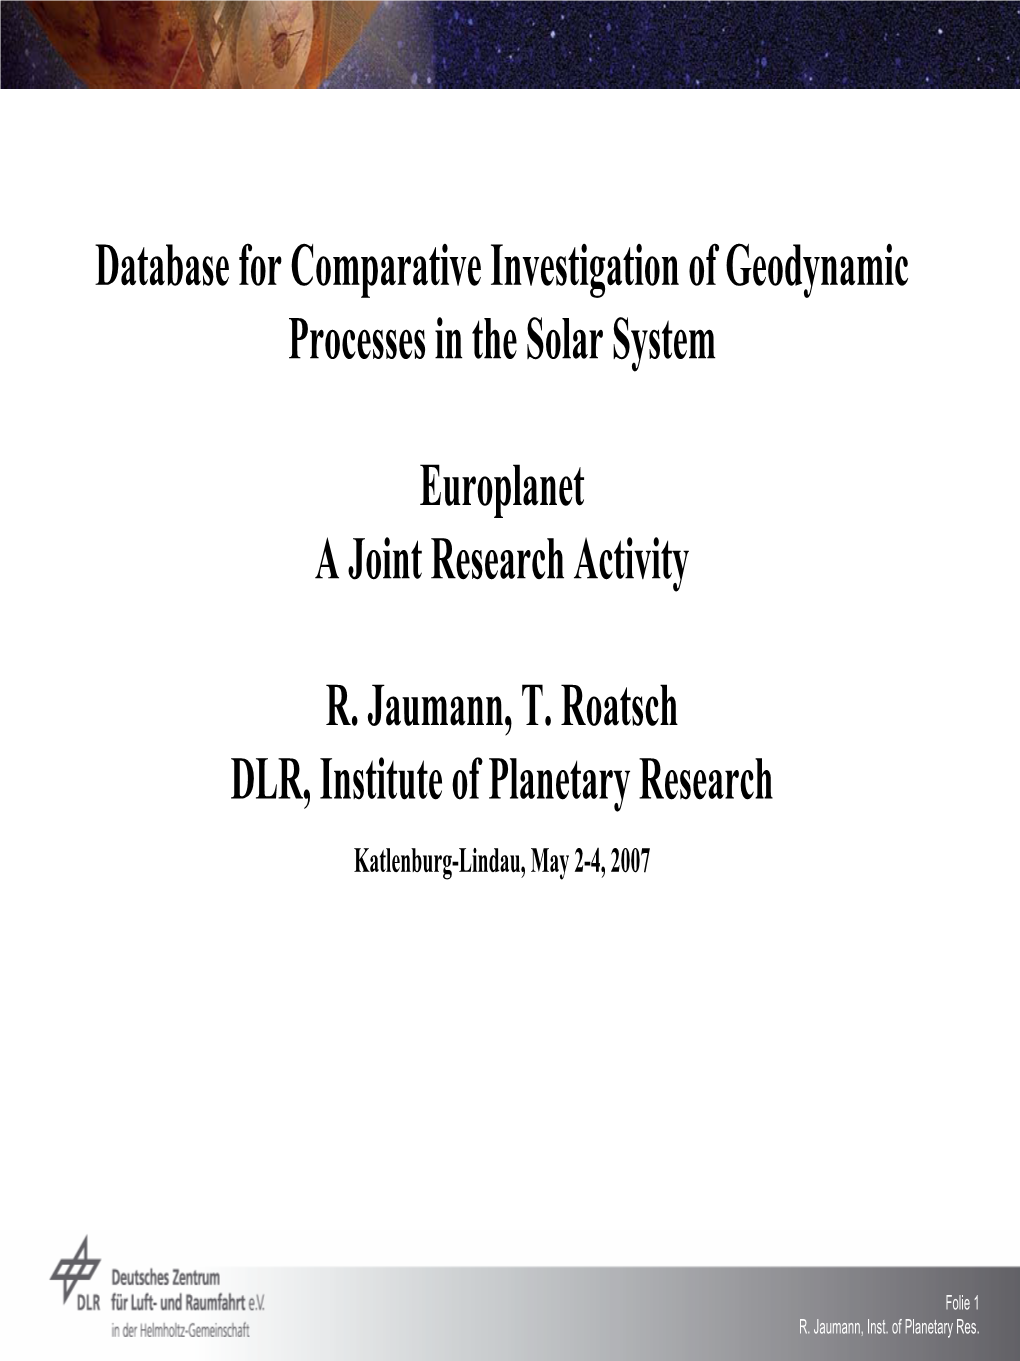 Database for Comparative Investigation of Geodynamic Processes in the Solar System Europlanet a Joint Research Activity R. Jauma